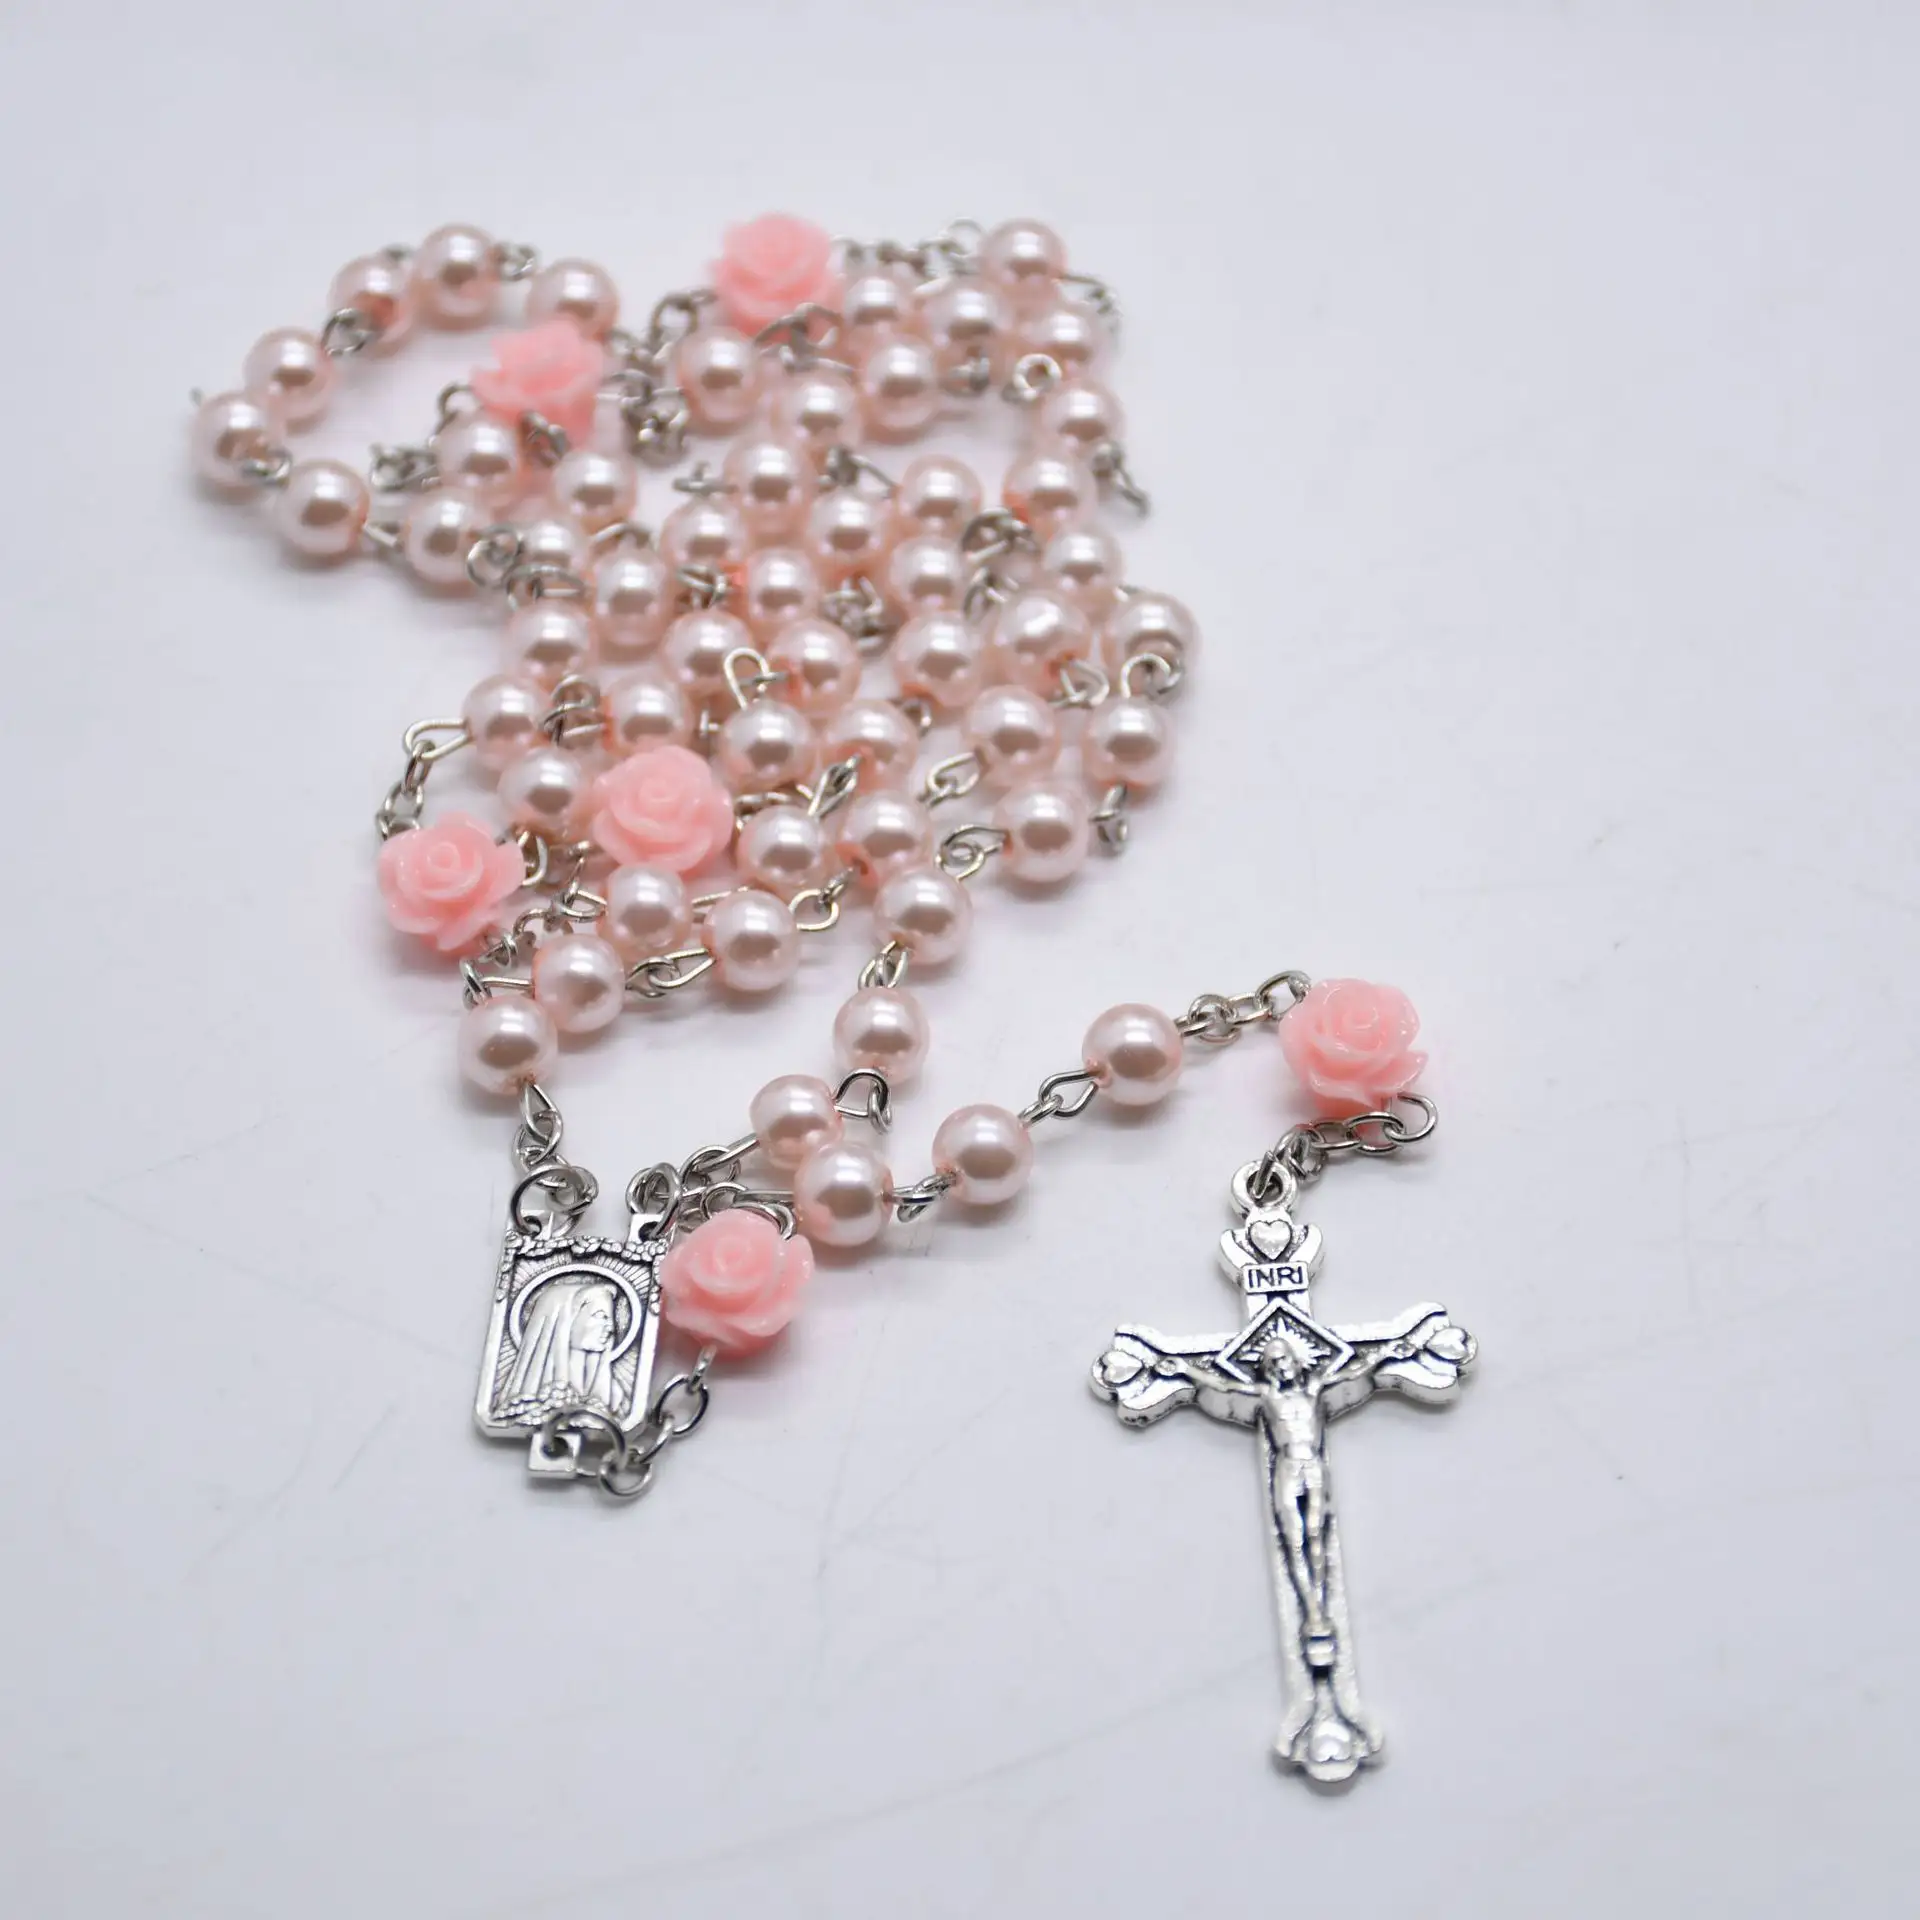 8mm Catholic Rosary Beads Jewelry Religious Rosary Beads Artificial Pearl Rose Charm Cross Necklace for Mother's Day Gift